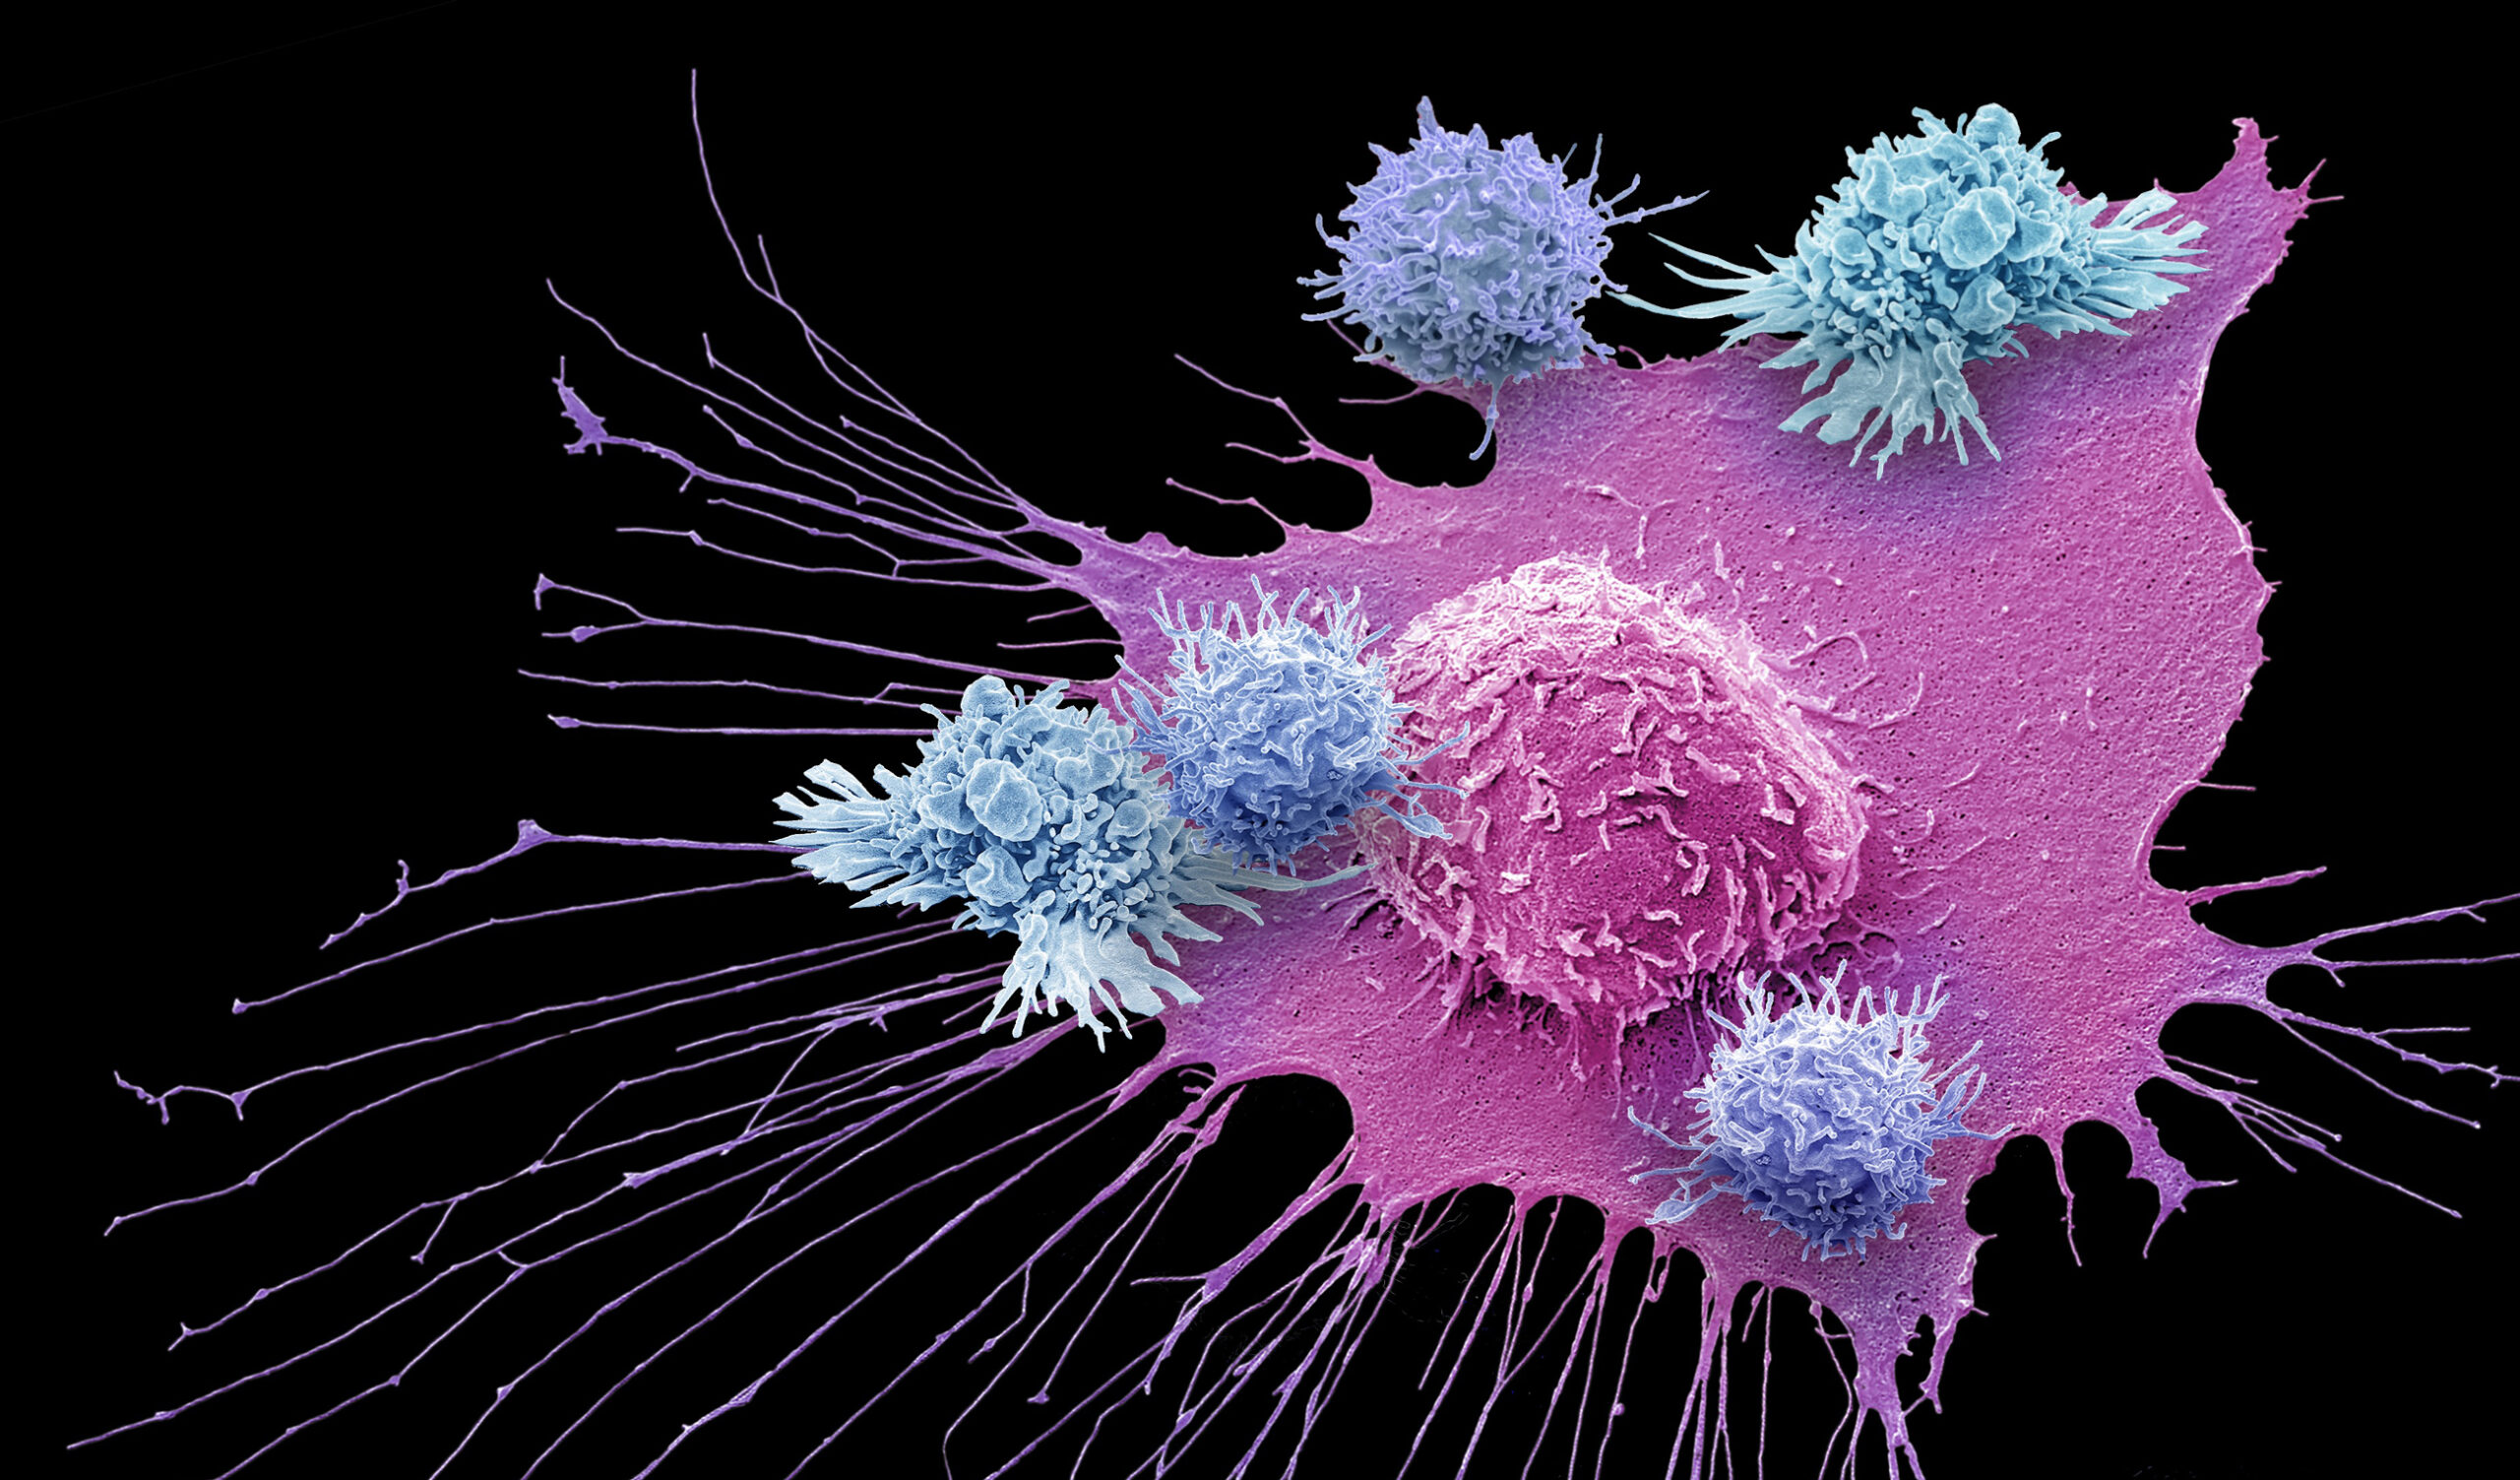 T cells (blue) of the immune system attack a cancer cell (pink) in this color-enhanced scanning electron micrograph. The 2018 Nobel Prize for Physiology or Medicine has been awarded for work leading to new therapies against cancer based on unleashing the latent power of the immune system to attack tumor cells.